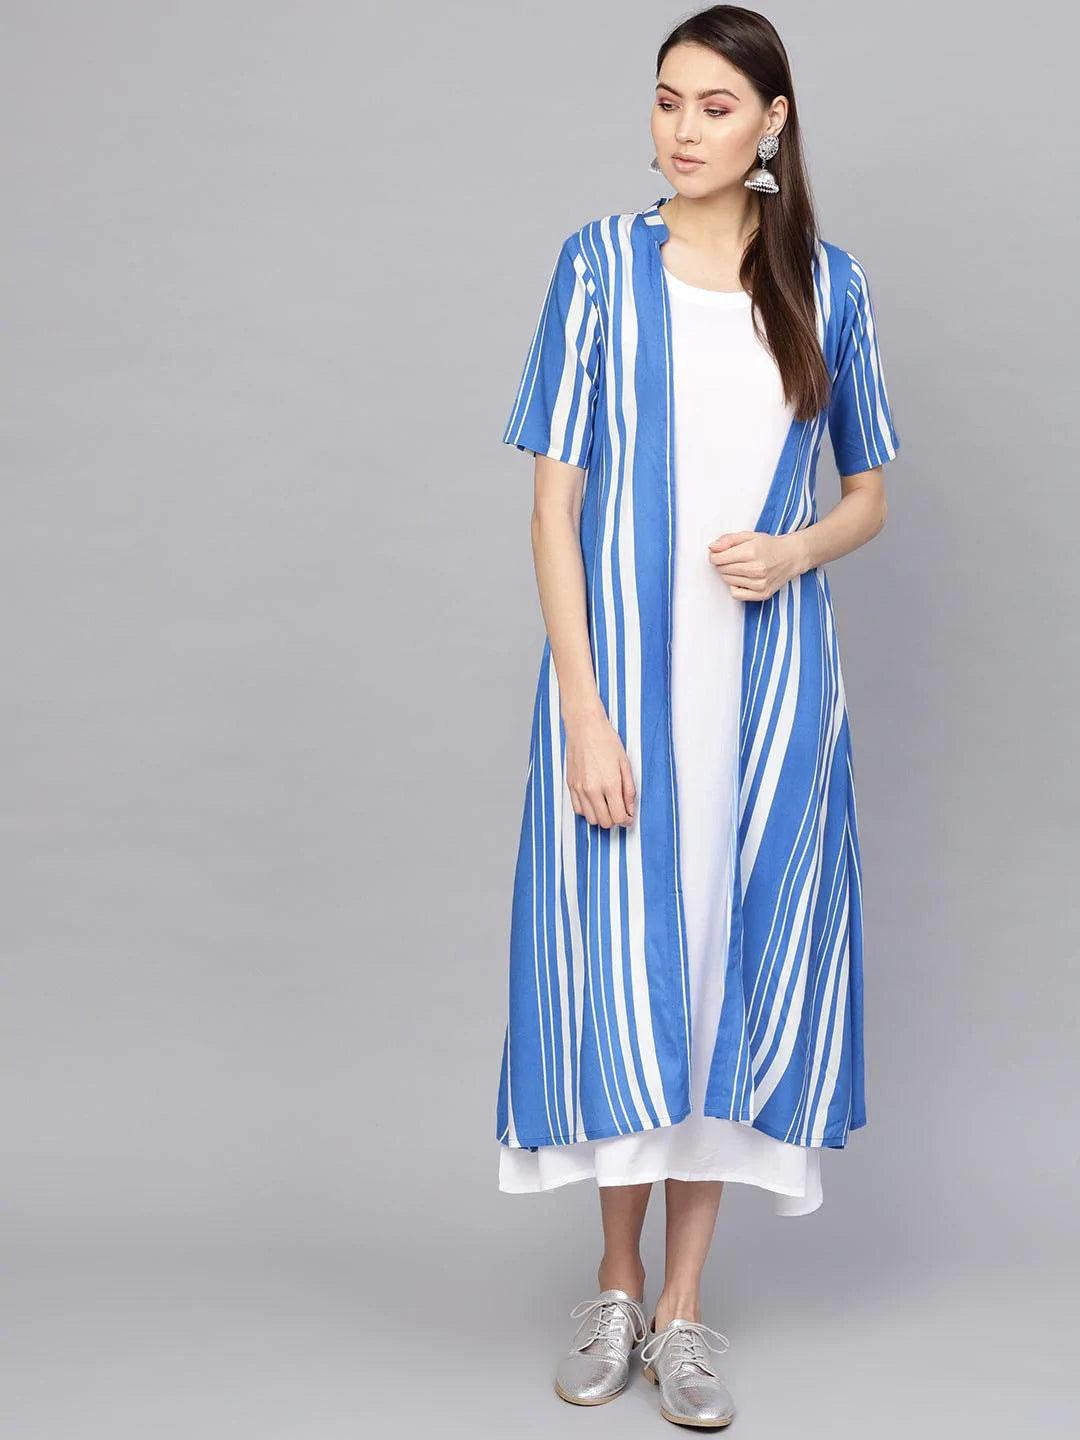 White Striped Cotton Dress With Jacket